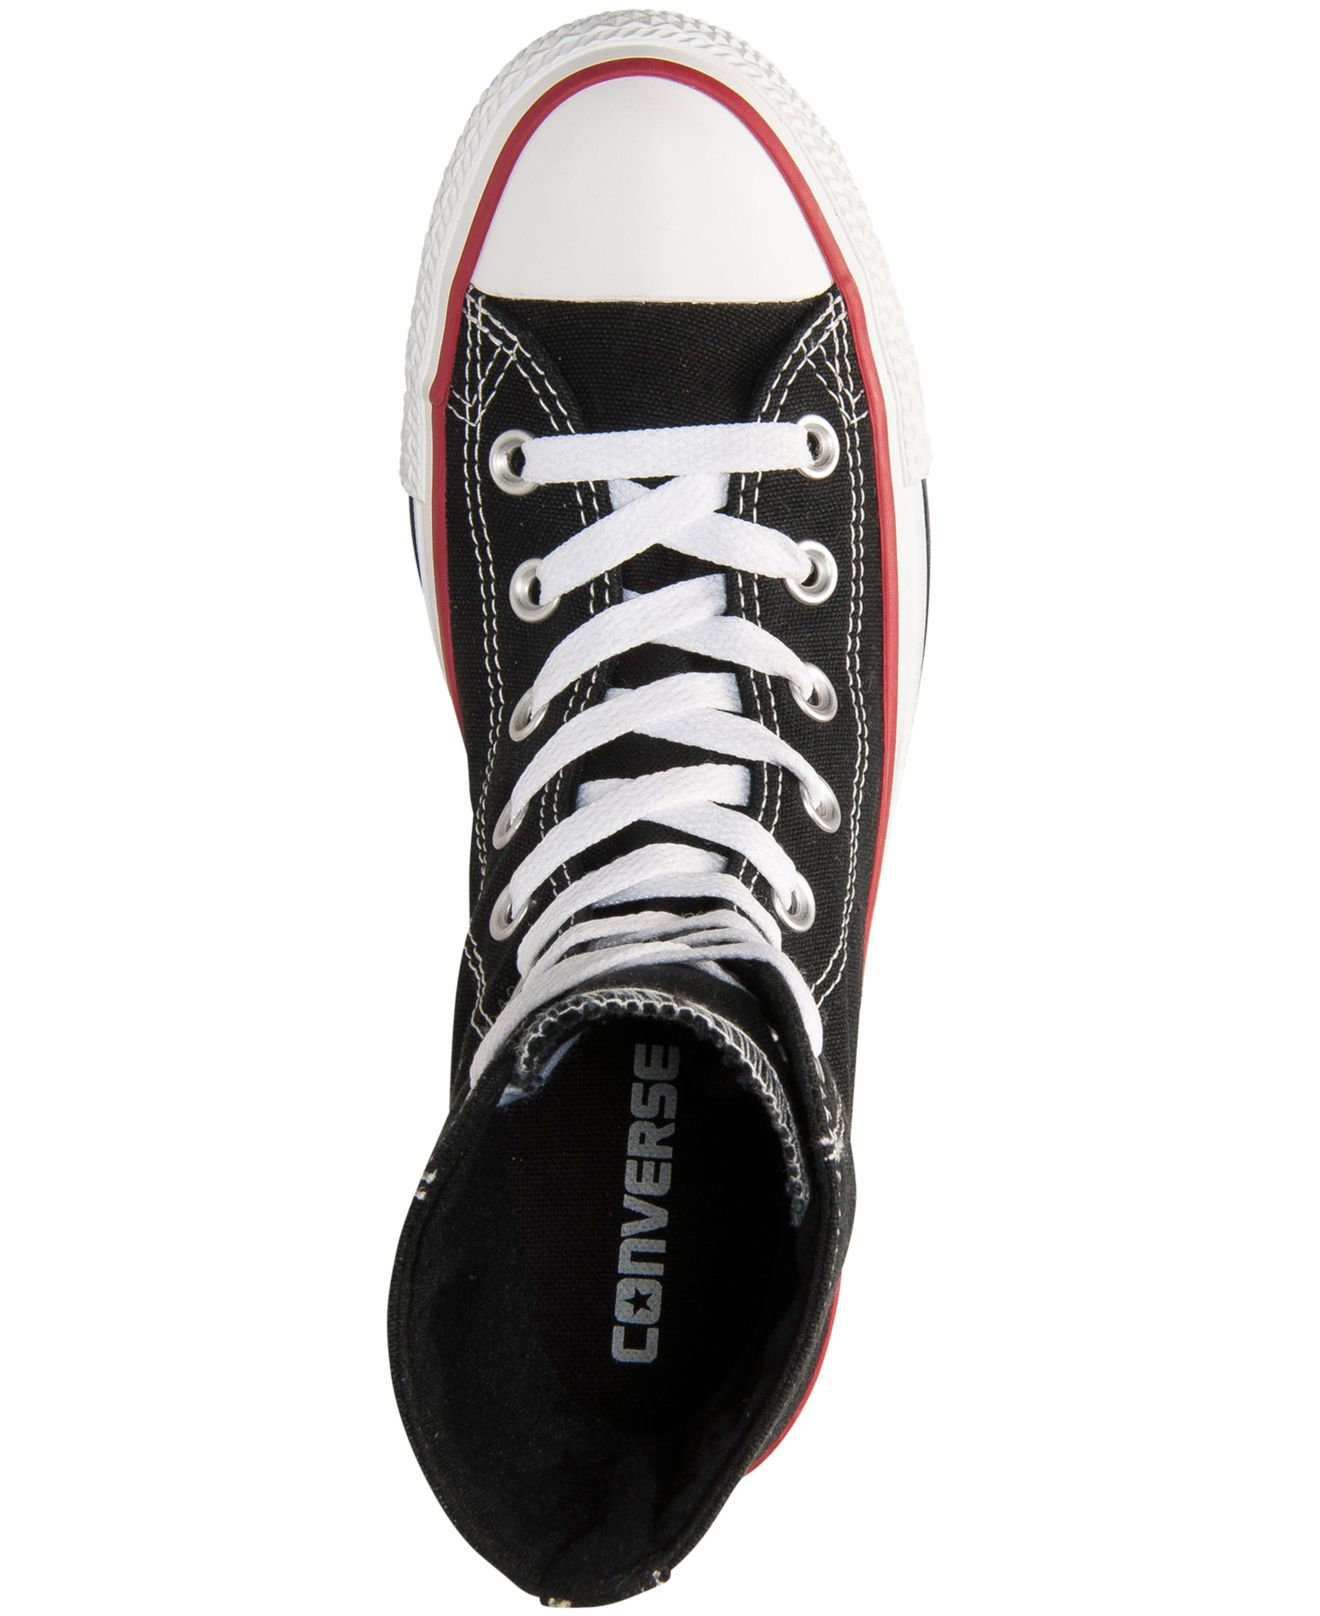 converse white with red line